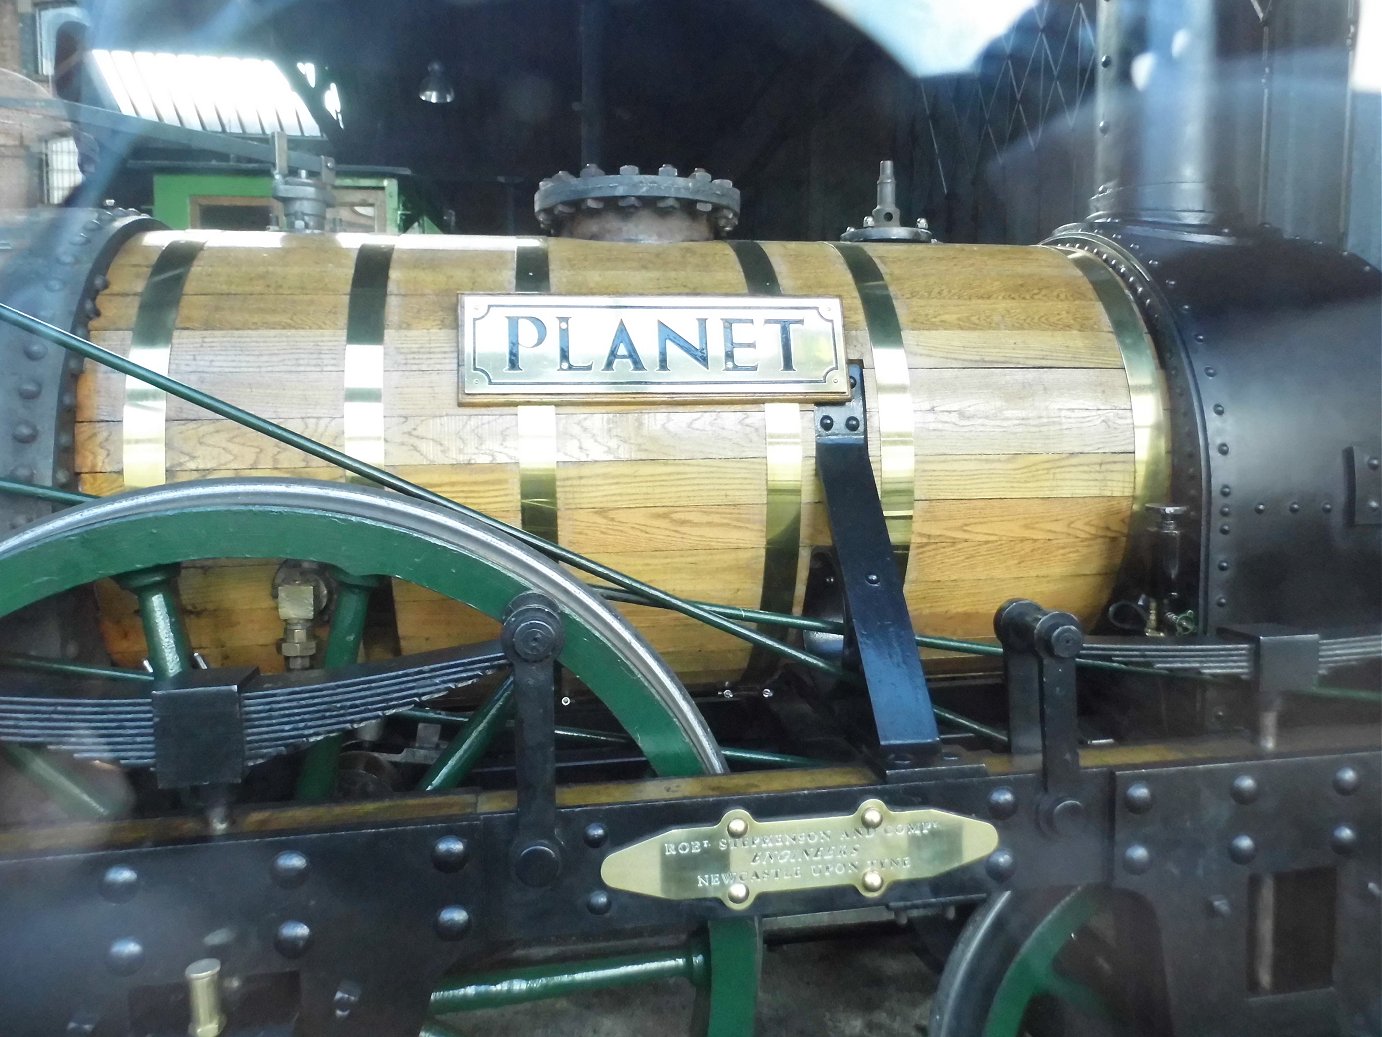 Planet at the Manchester Museum Of Science and Industry, 08/10/2015. 